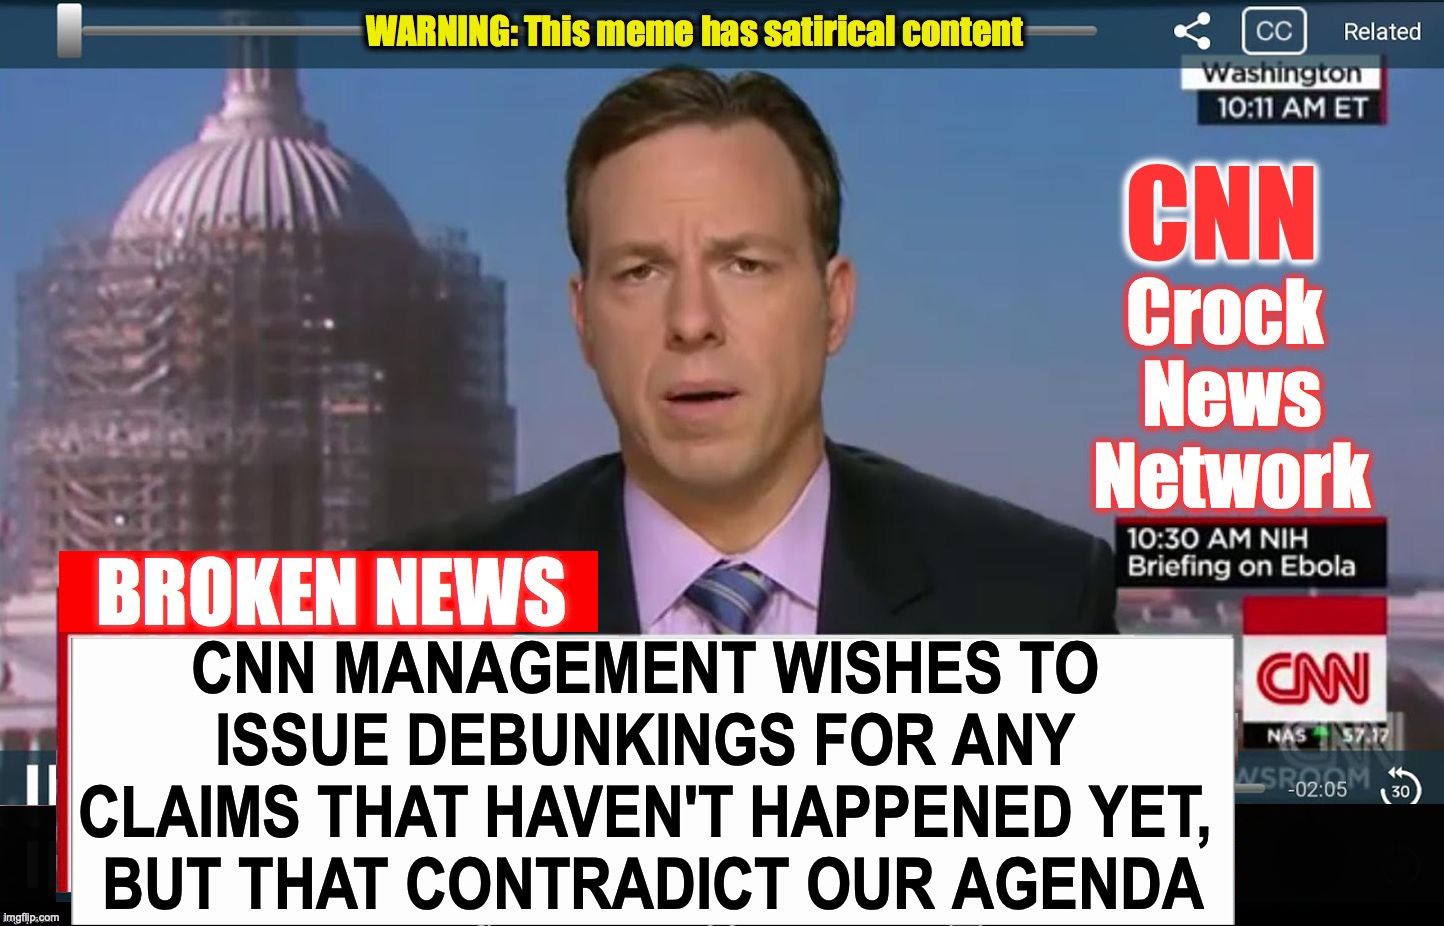 Bobbing for Debunkings | CNN MANAGEMENT WISHES TO ISSUE DEBUNKINGS FOR ANY CLAIMS THAT HAVEN'T HAPPENED YET,
 BUT THAT CONTRADICT OUR AGENDA | image tagged in cnn broken news | made w/ Imgflip meme maker